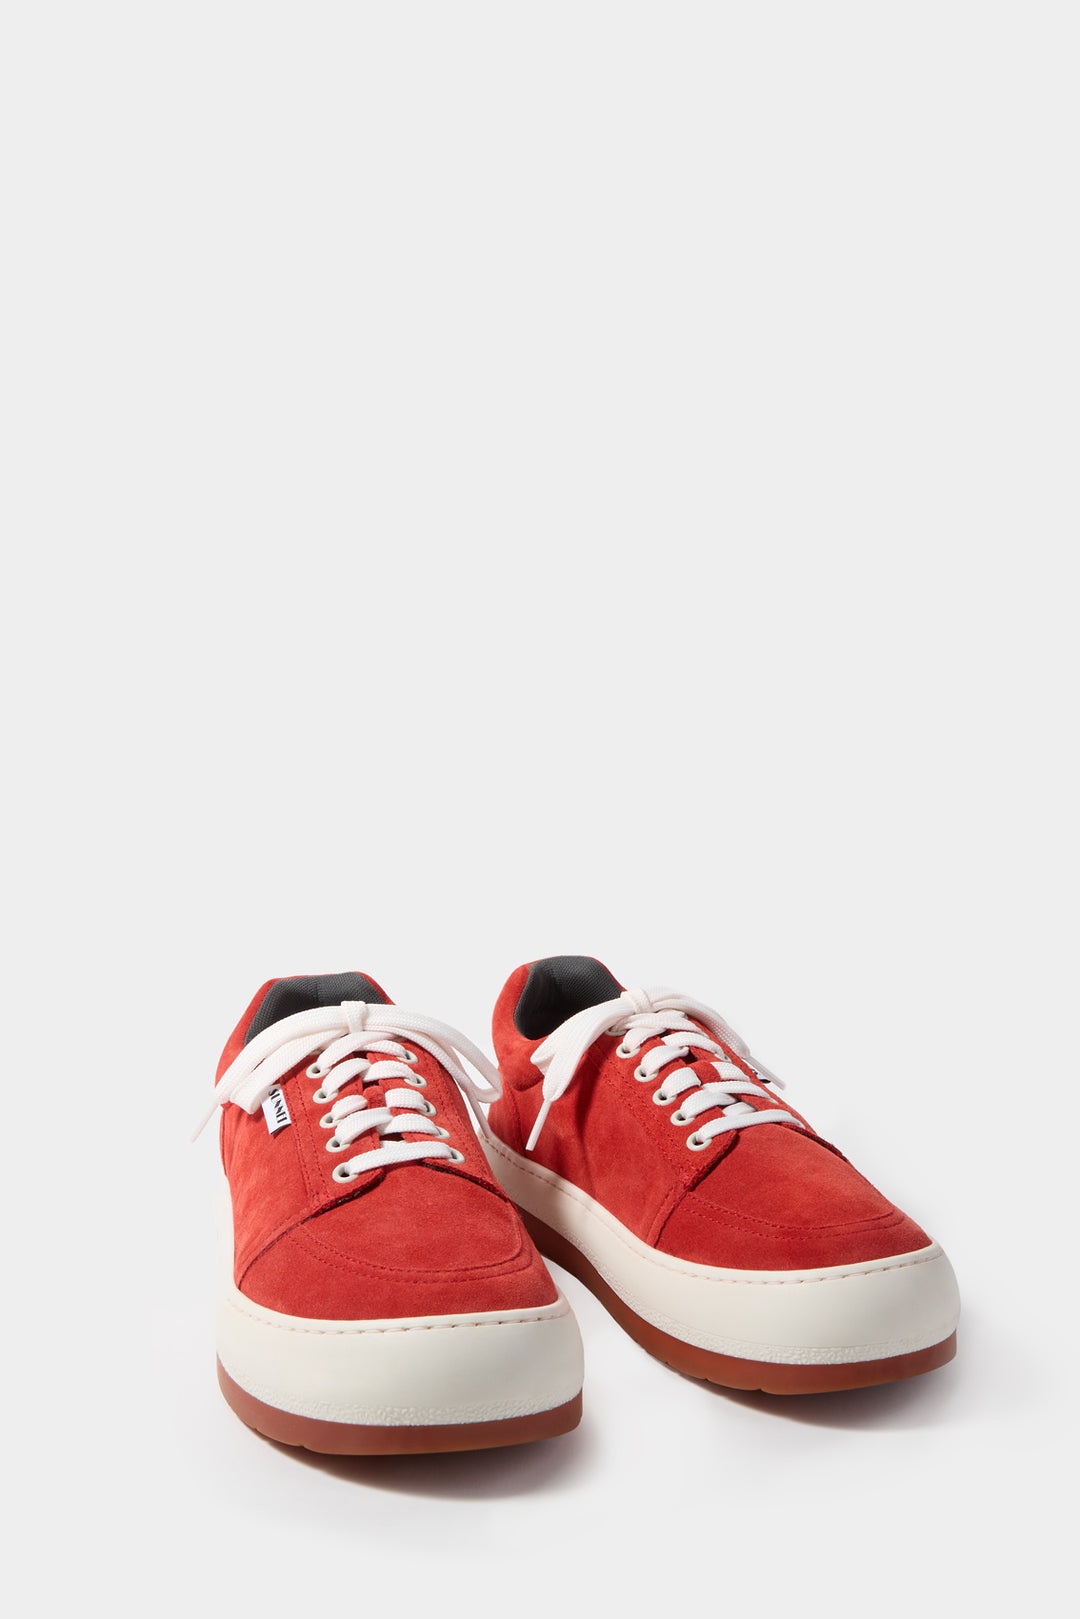 DREAMY SHOES / suede / red - 2